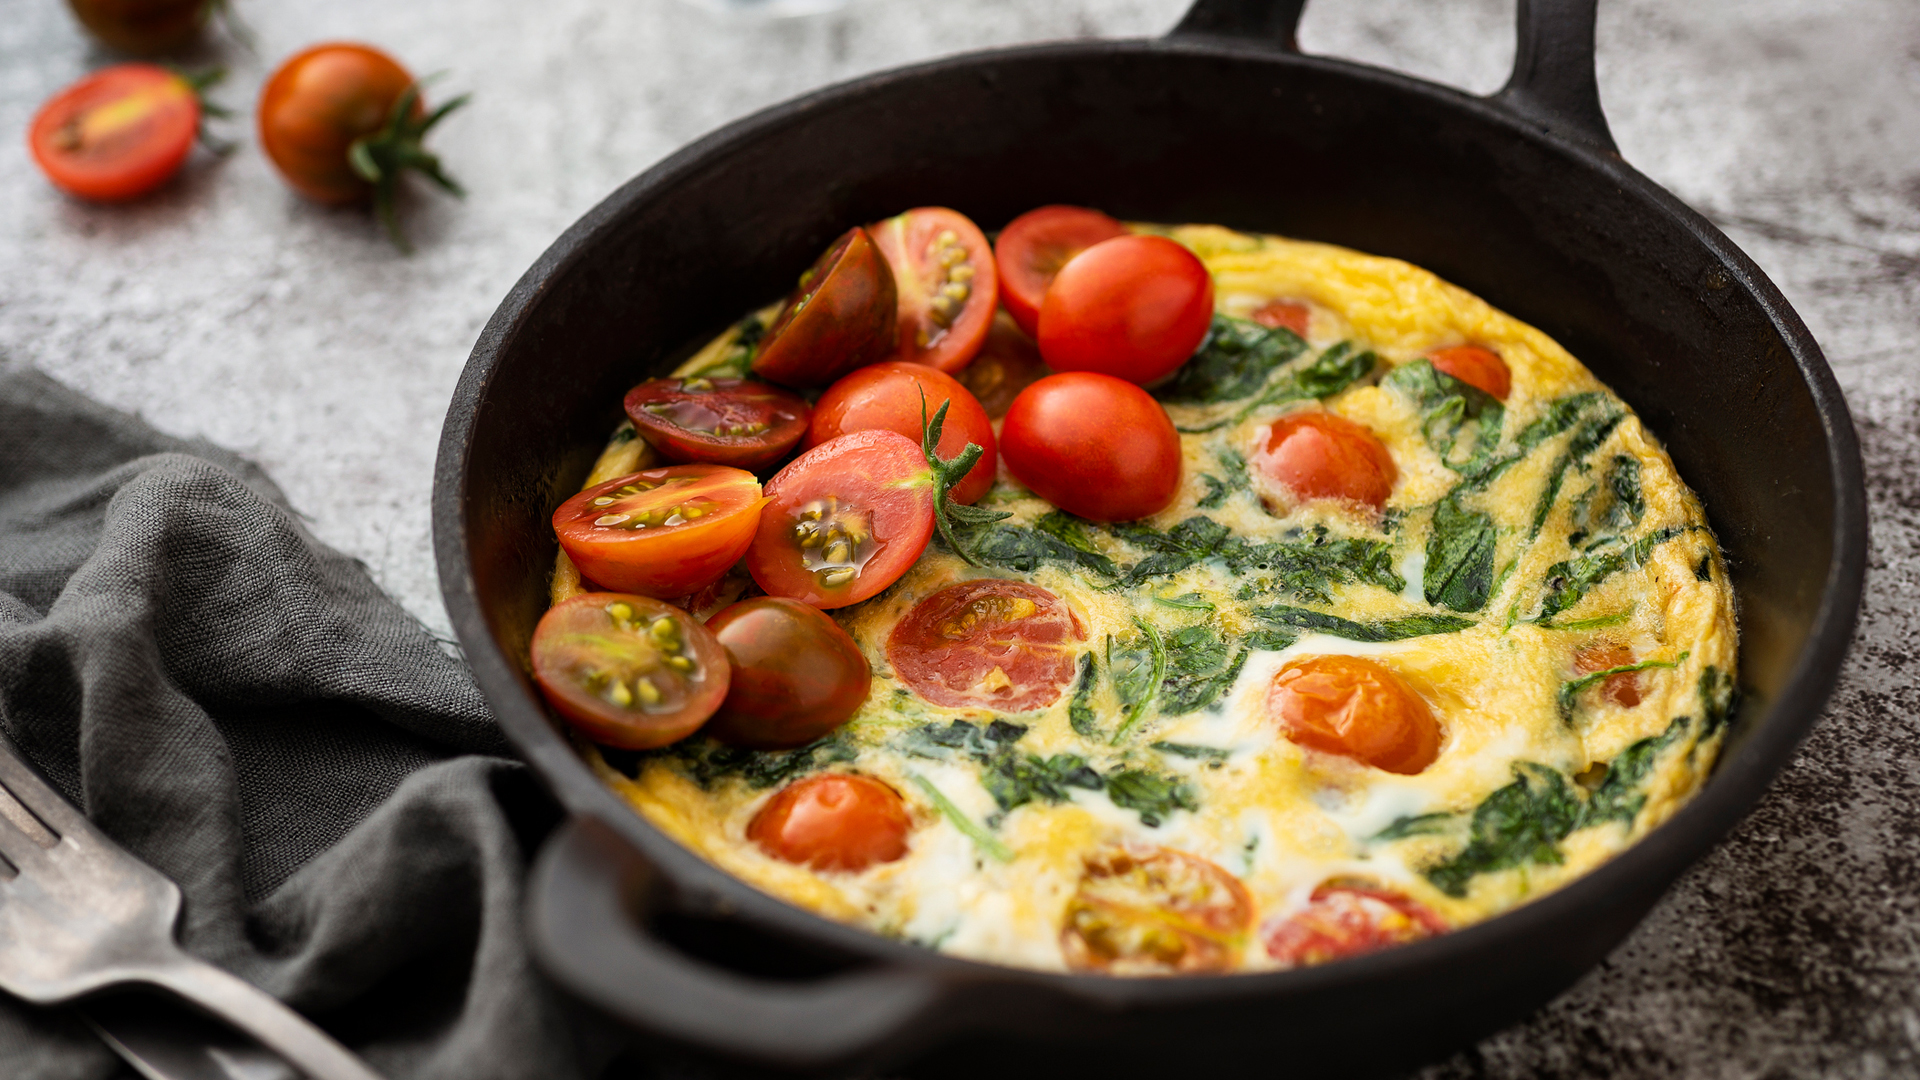 Tomato and spinach omelet for breakfast